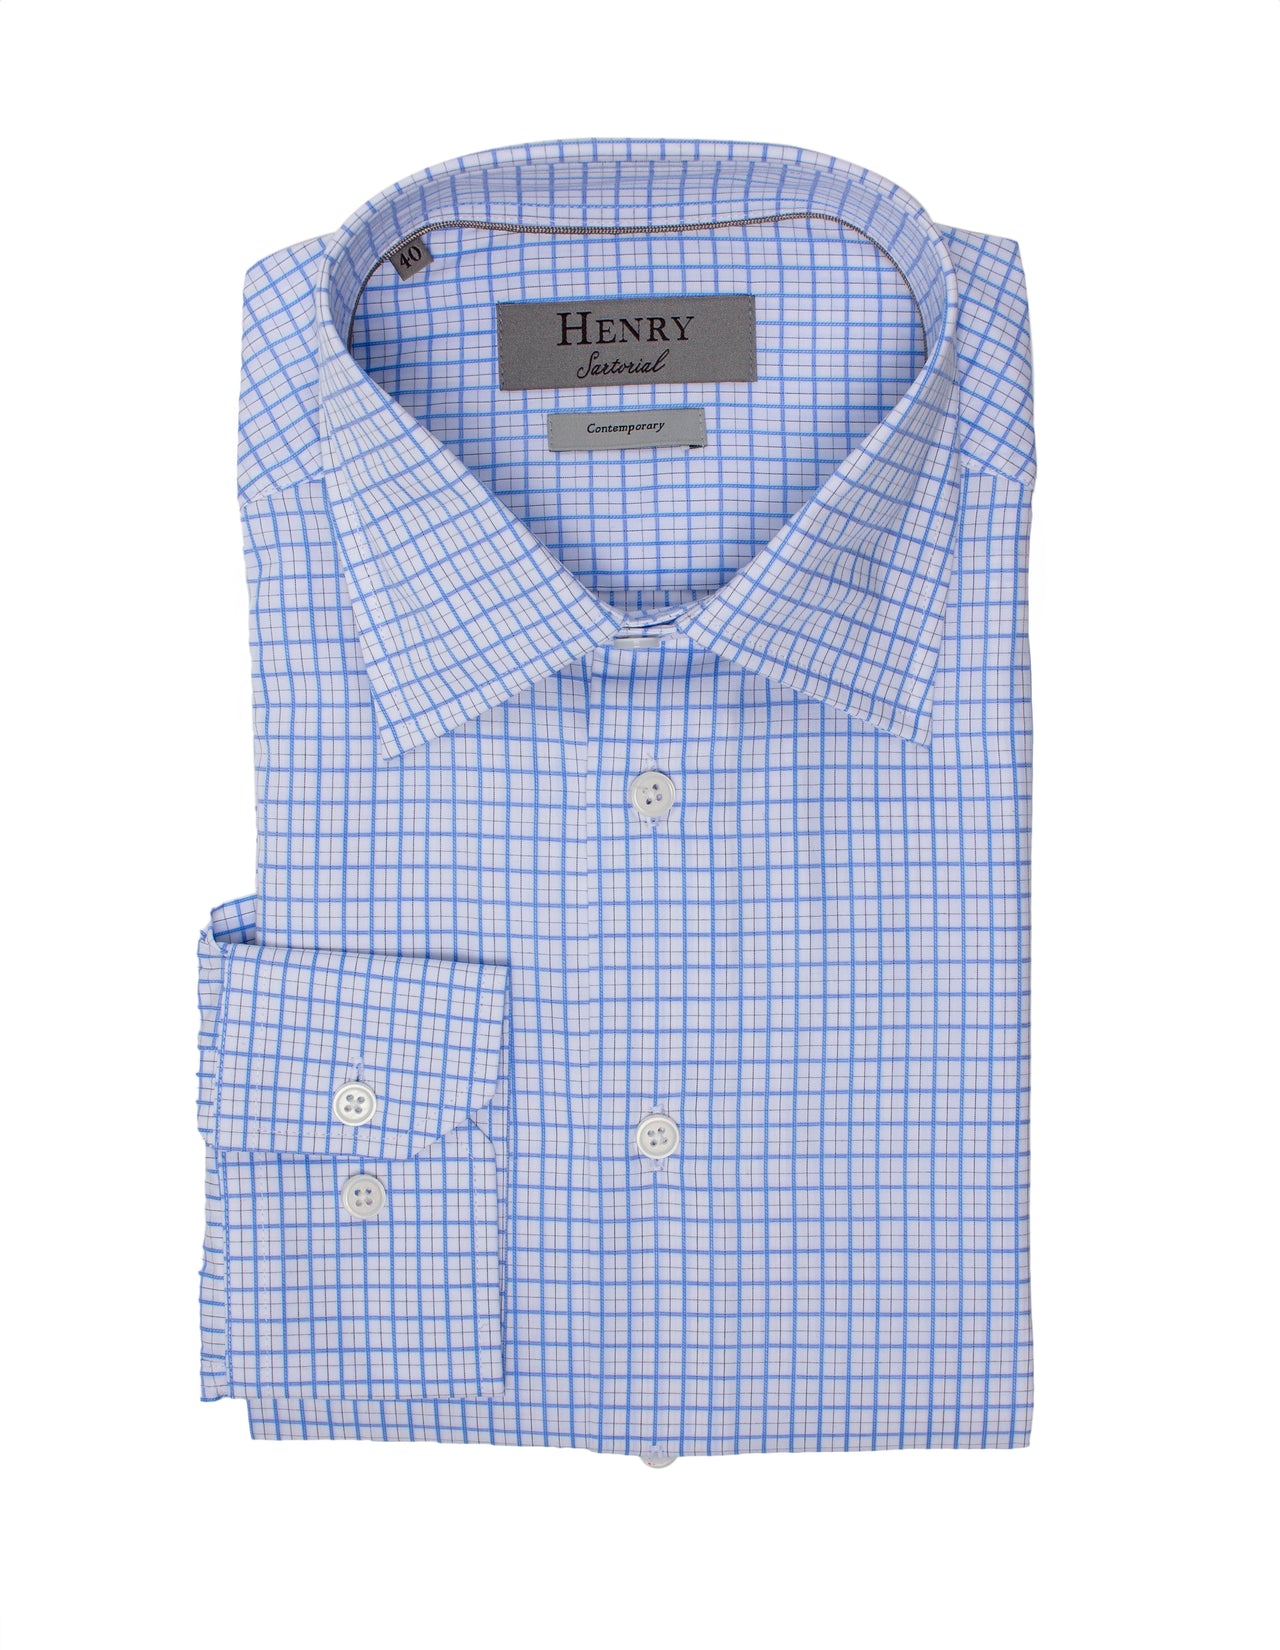 HENRY SARTORIAL Contemporary Fit Check Shirt BLUE/BROWN